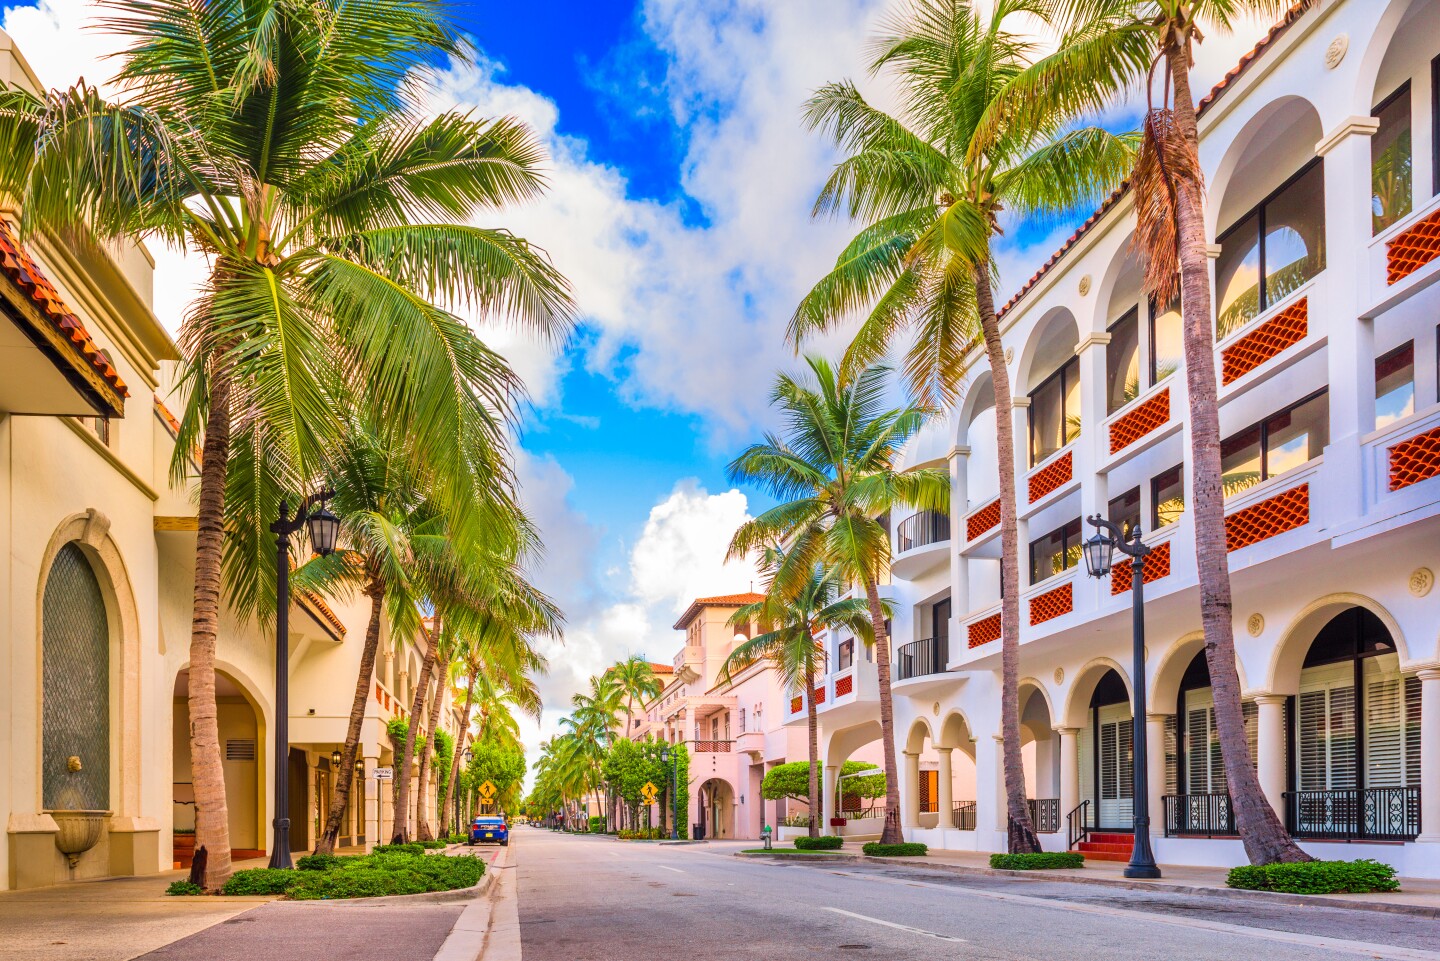 <h2>4. Palm Beach</h2> <ul>   <li><b>Location:</b> Southeastern Florida</li>   <li><b>Come for: </b>beautiful architecture and celebrity spotting</li>  </ul> <p>Movie stars, finance tycoons, and even royalty have graced the barrier island located on the southeastern side of the state. Chocked full of Mediterranean revival and Venetian-inspired architecture, Palm Beach captures a Gilded Age feel in historic landmarks like the<a class="Link" href="https://www.flaglermuseum.us/" rel="noopener"> Flagler Museum</a>.</p> <p>For innovative programming and community engagement opportunities like opera workshops open to the public, visit the <a class="Link" href="https://fourarts.org/" rel="noopener">Society of the Four Arts</a> along the Intracoastal Waterway. Its 10-acre campus includes performance hall, art gallery, education center, libraries, and sculpture gardens.</p> <h3>Where to stay</h3> <ul>   <li><b>Book now: </b><a class="Link" href="https://thecolonypalmbeach.com/" rel="noopener">The Colony</a></li>  </ul> <p>This <a class="Link" href="https://thecolonypalmbeach.com/" rel="noopener">pink-hued charmer</a> has offered chic accommodations for guests like Judy Garland and John Lennon since 1947. Only feet from the sand, the vintage Floridian decor coupled with amenities like beach cruisers, beach butlers, golf, tennis, boating, babysitting services, and pet services make this a getaway the place to be seen.</p>